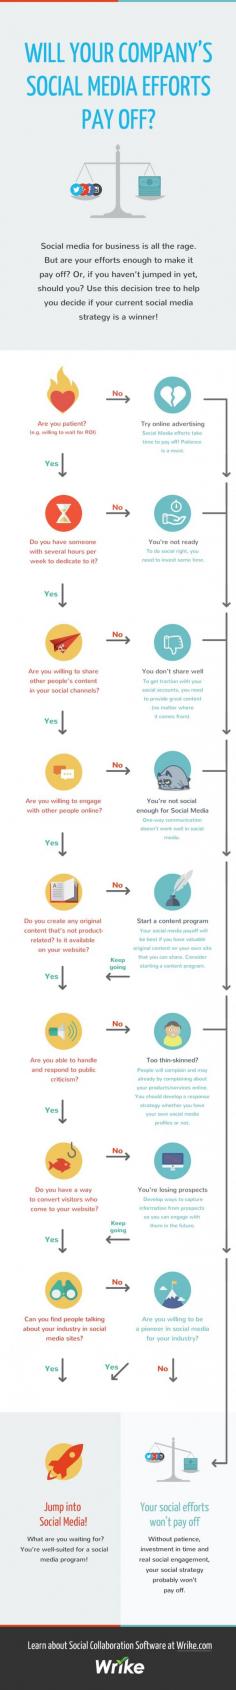 Is Your Business Ready for Social Media? (Use This Decision Tree to Find Out!)